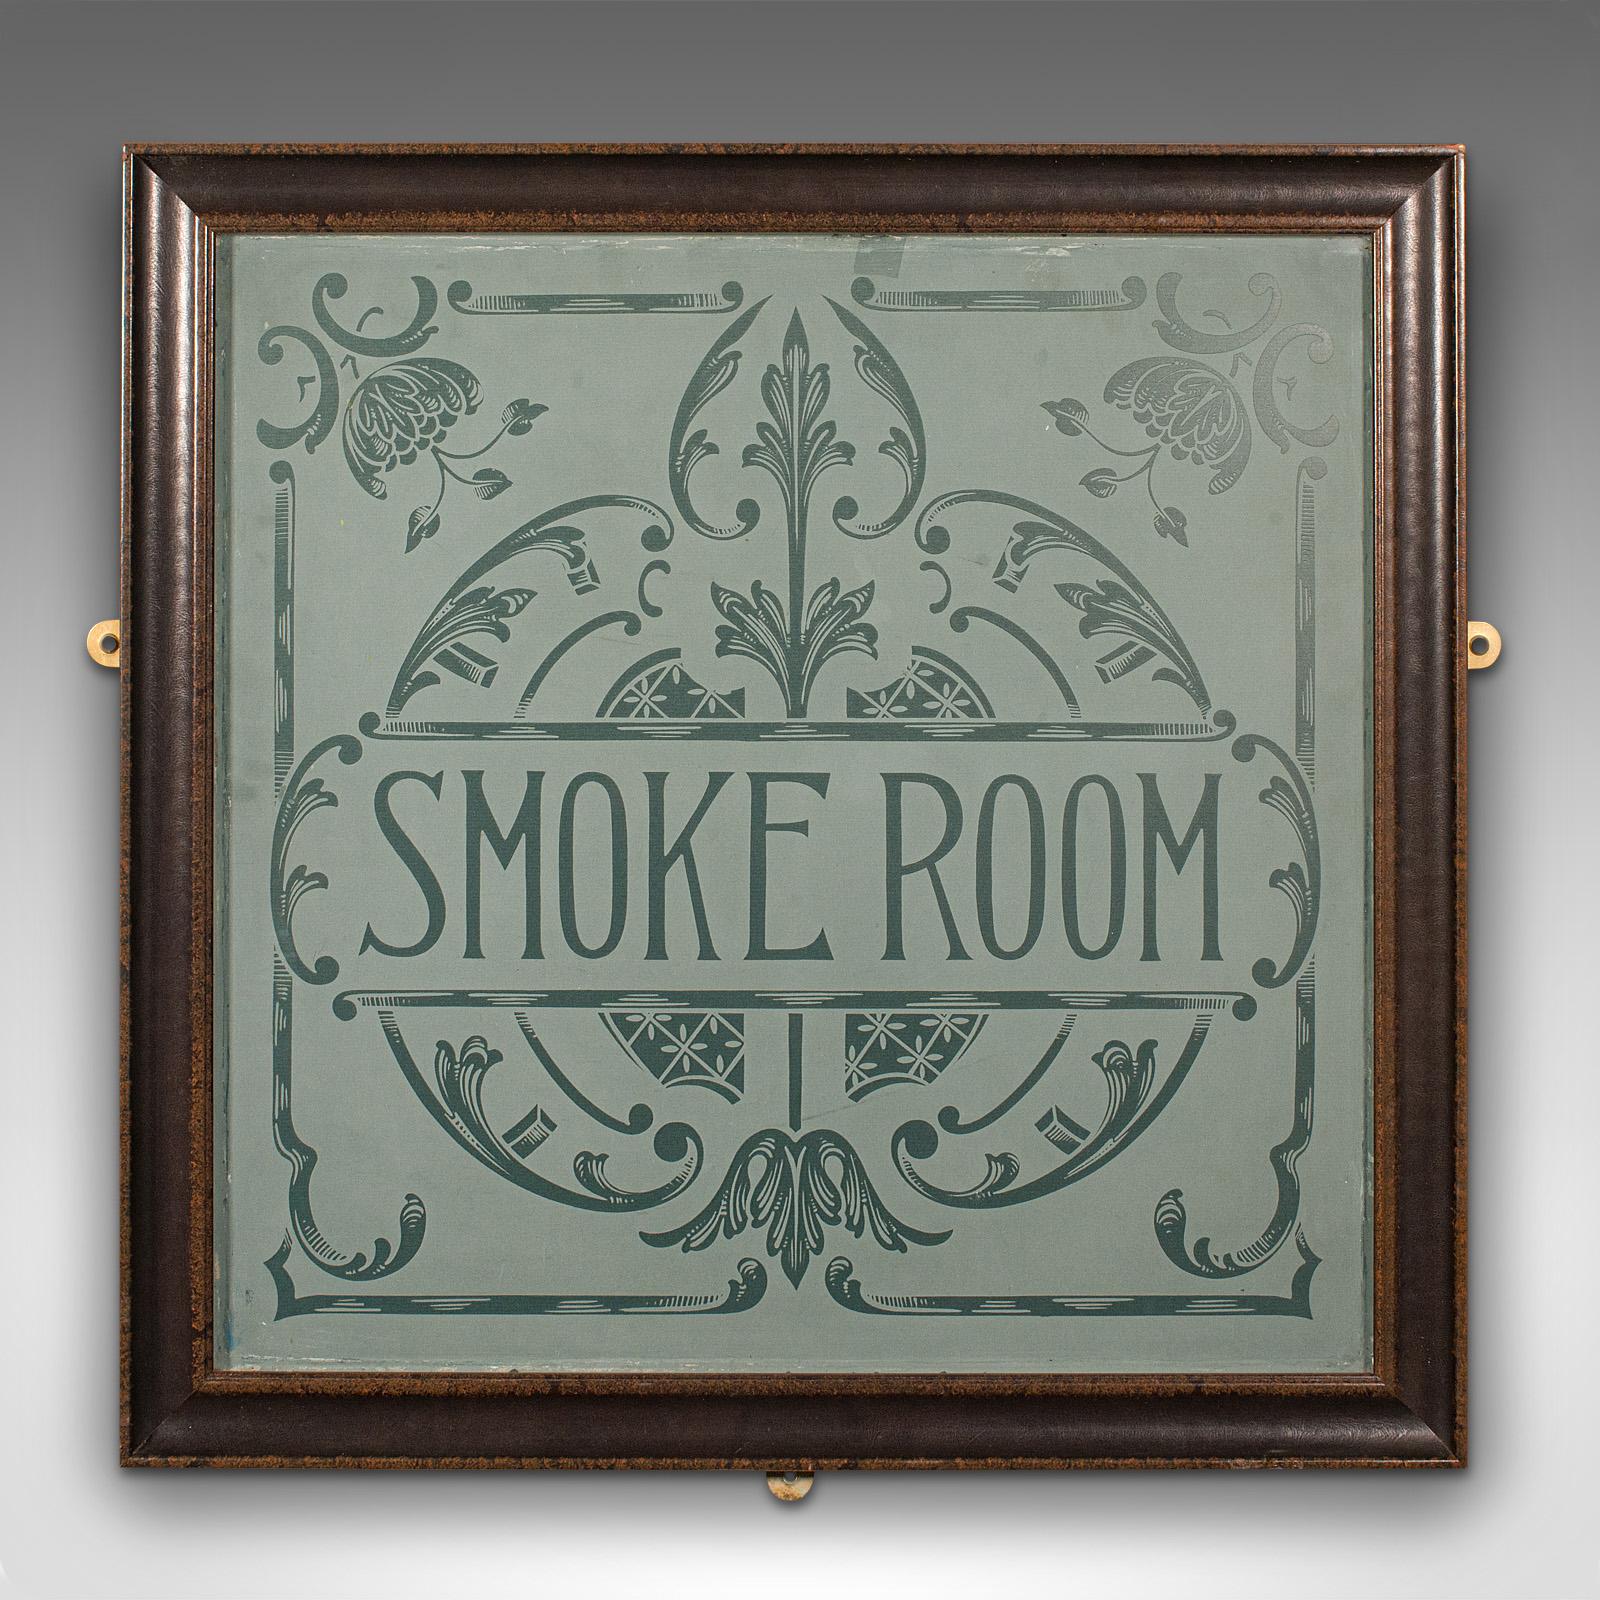 This is an antique ship's smoke room sign. An English, leather framed decorative panel, dating to the late Victorian period, circa 1900.

Ideal for accentuating a ship's deck in period, or a dedicated room in the home
Displays a desirable aged